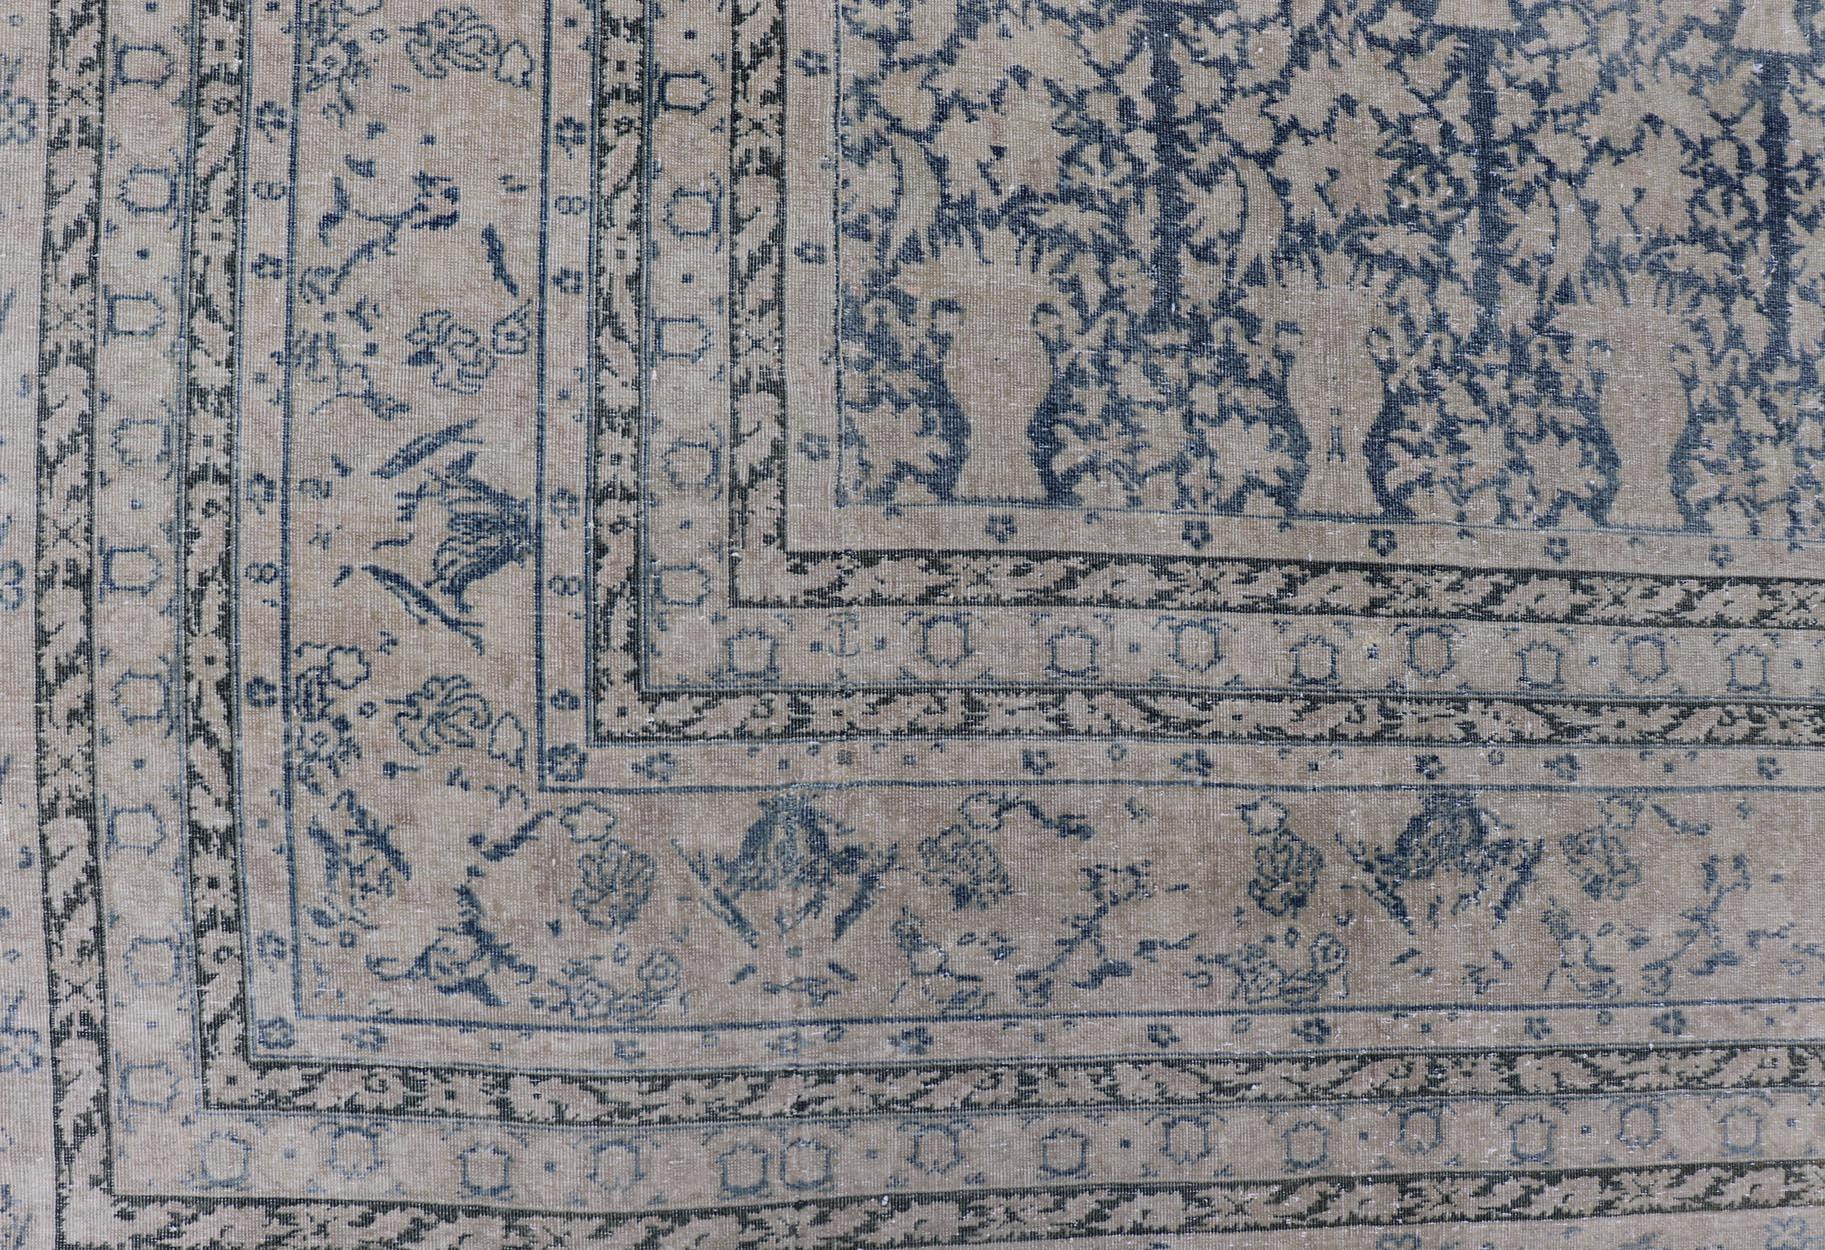 Antique Indian Agra Rug with All-Over Floral Design in Light Blues and Cream. 
Keivan Woven Arts, rug R20-0304, country of origin / type: India / Agra, circa 1900

Measures: 13'4 x 15'11

This large and wide antique Indian Agra was finely woven